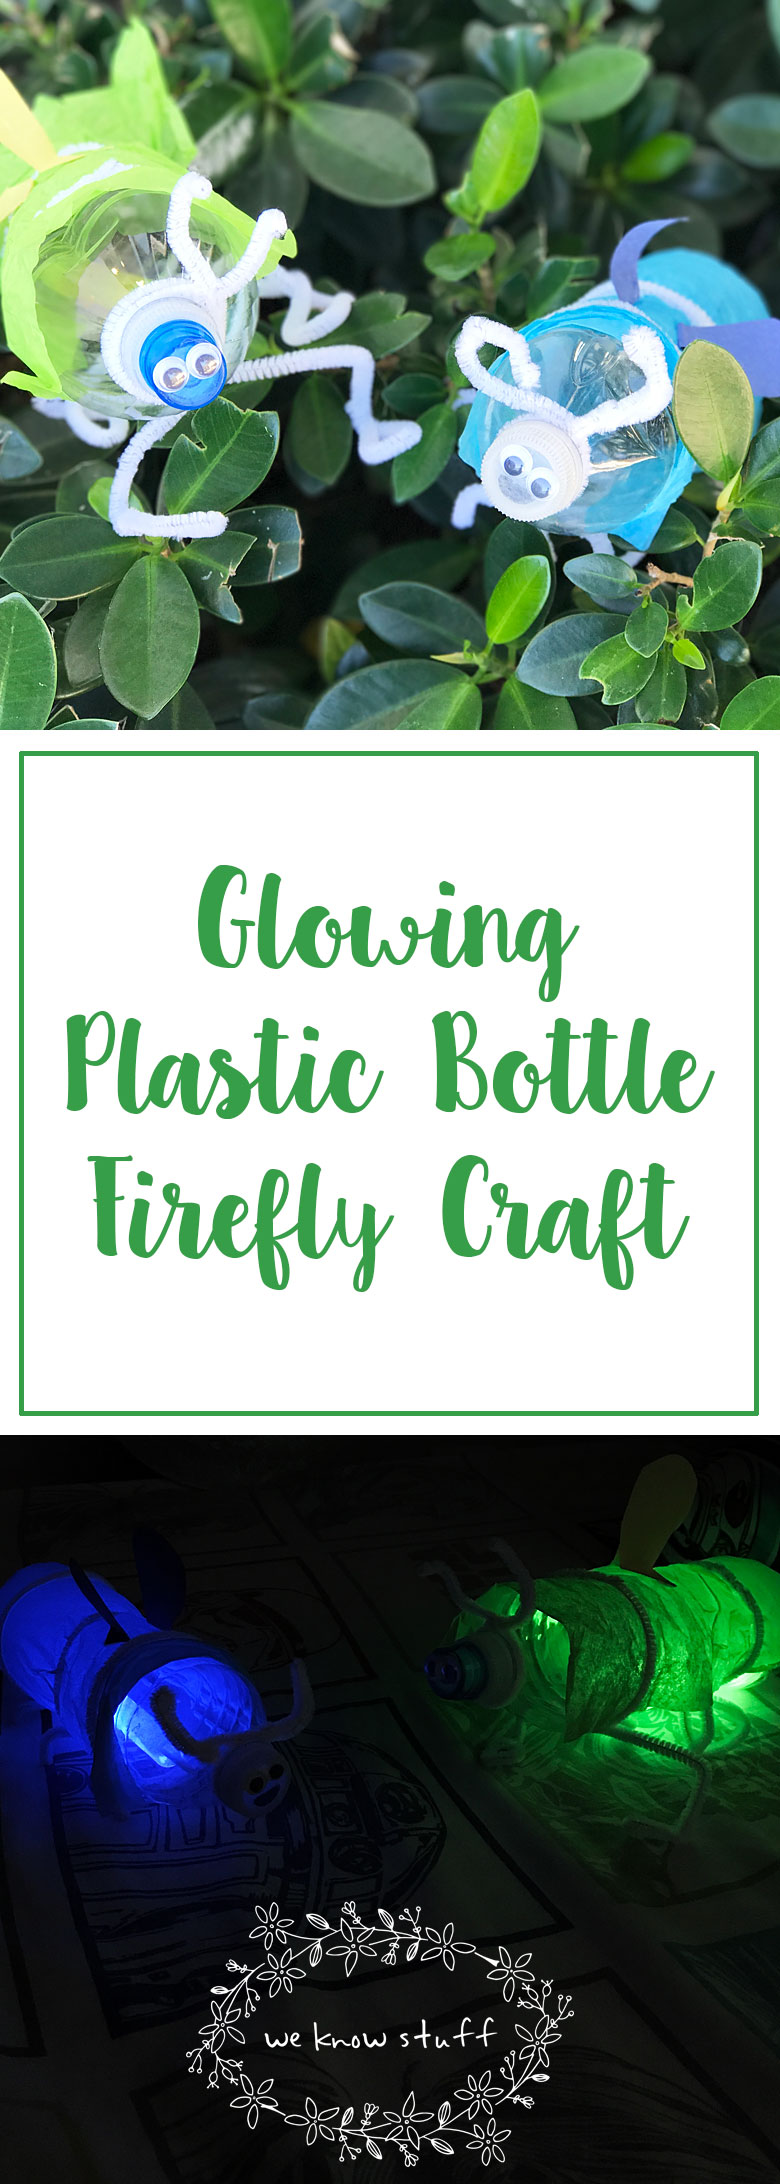 In the city, we don't get to see real fireflies. This glowing plastic bottle firefly craft is a fun way to show kids what they look like when night falls!